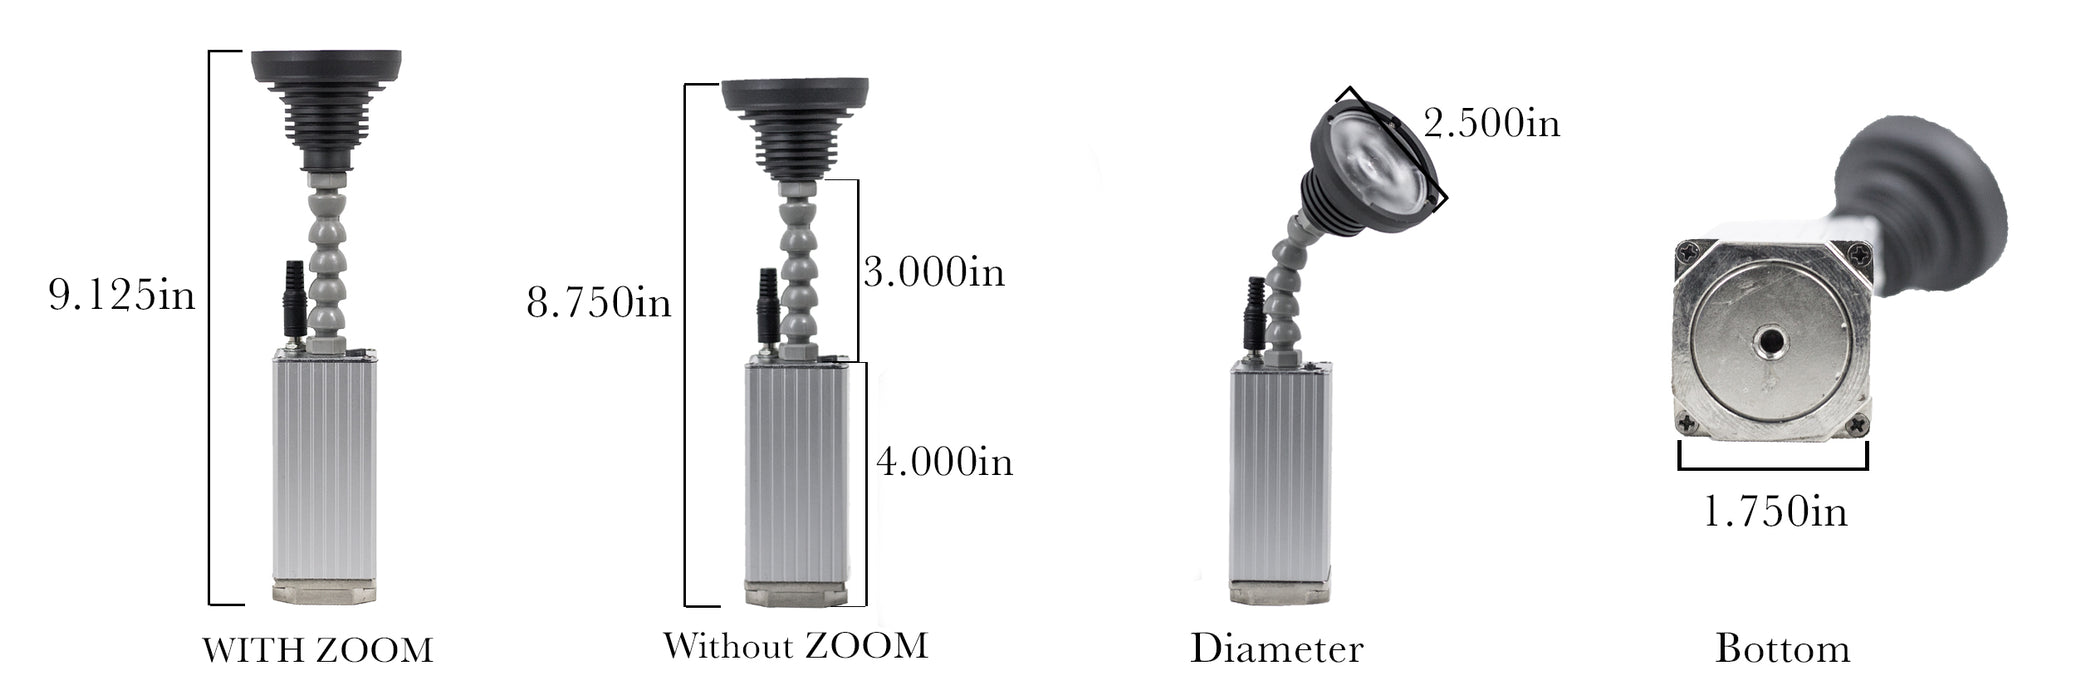 LED Event Light LED Bullet Zoom Pin Spot Wireless Stage & Event Light With Remote LightStoreUSA